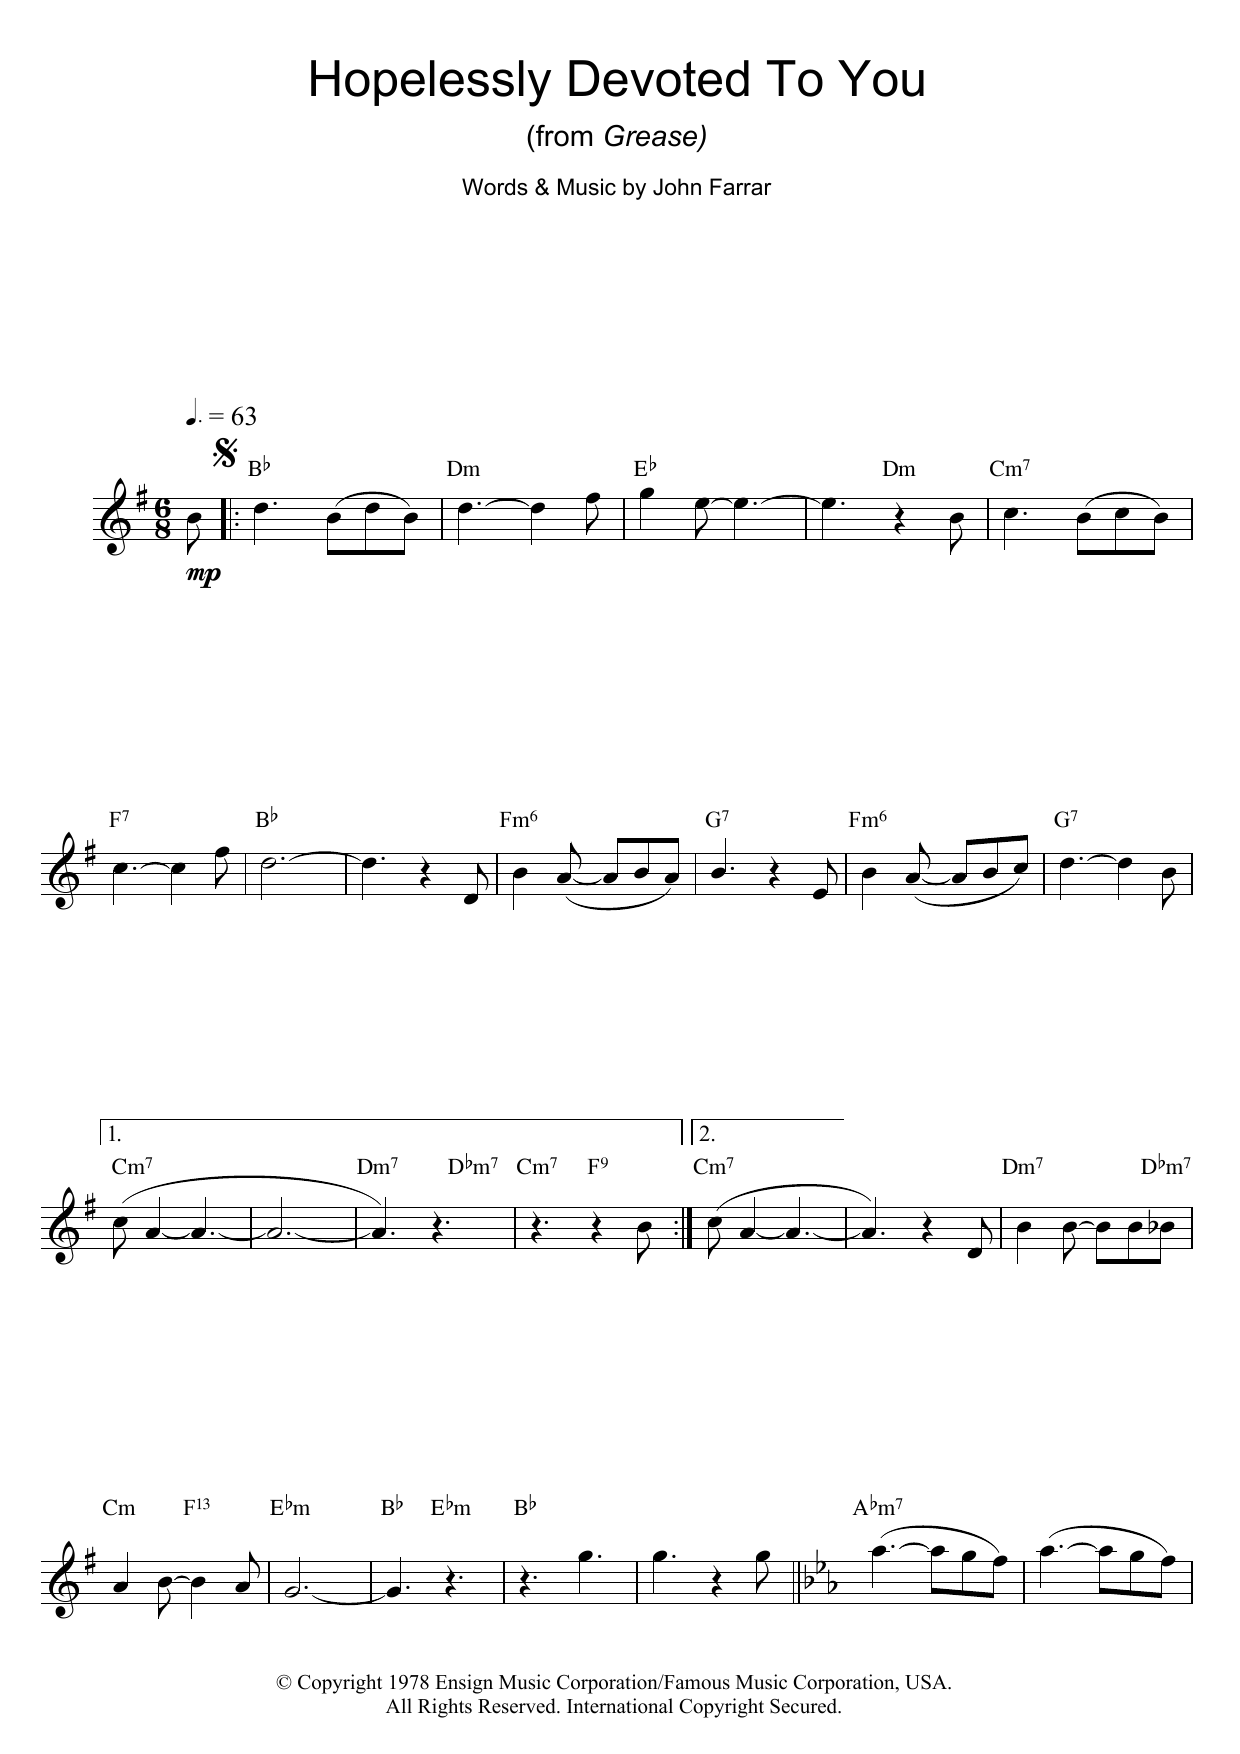 Olivia Newton-John Hopelessly Devoted To You (from Grease) sheet music notes and chords. Download Printable PDF.